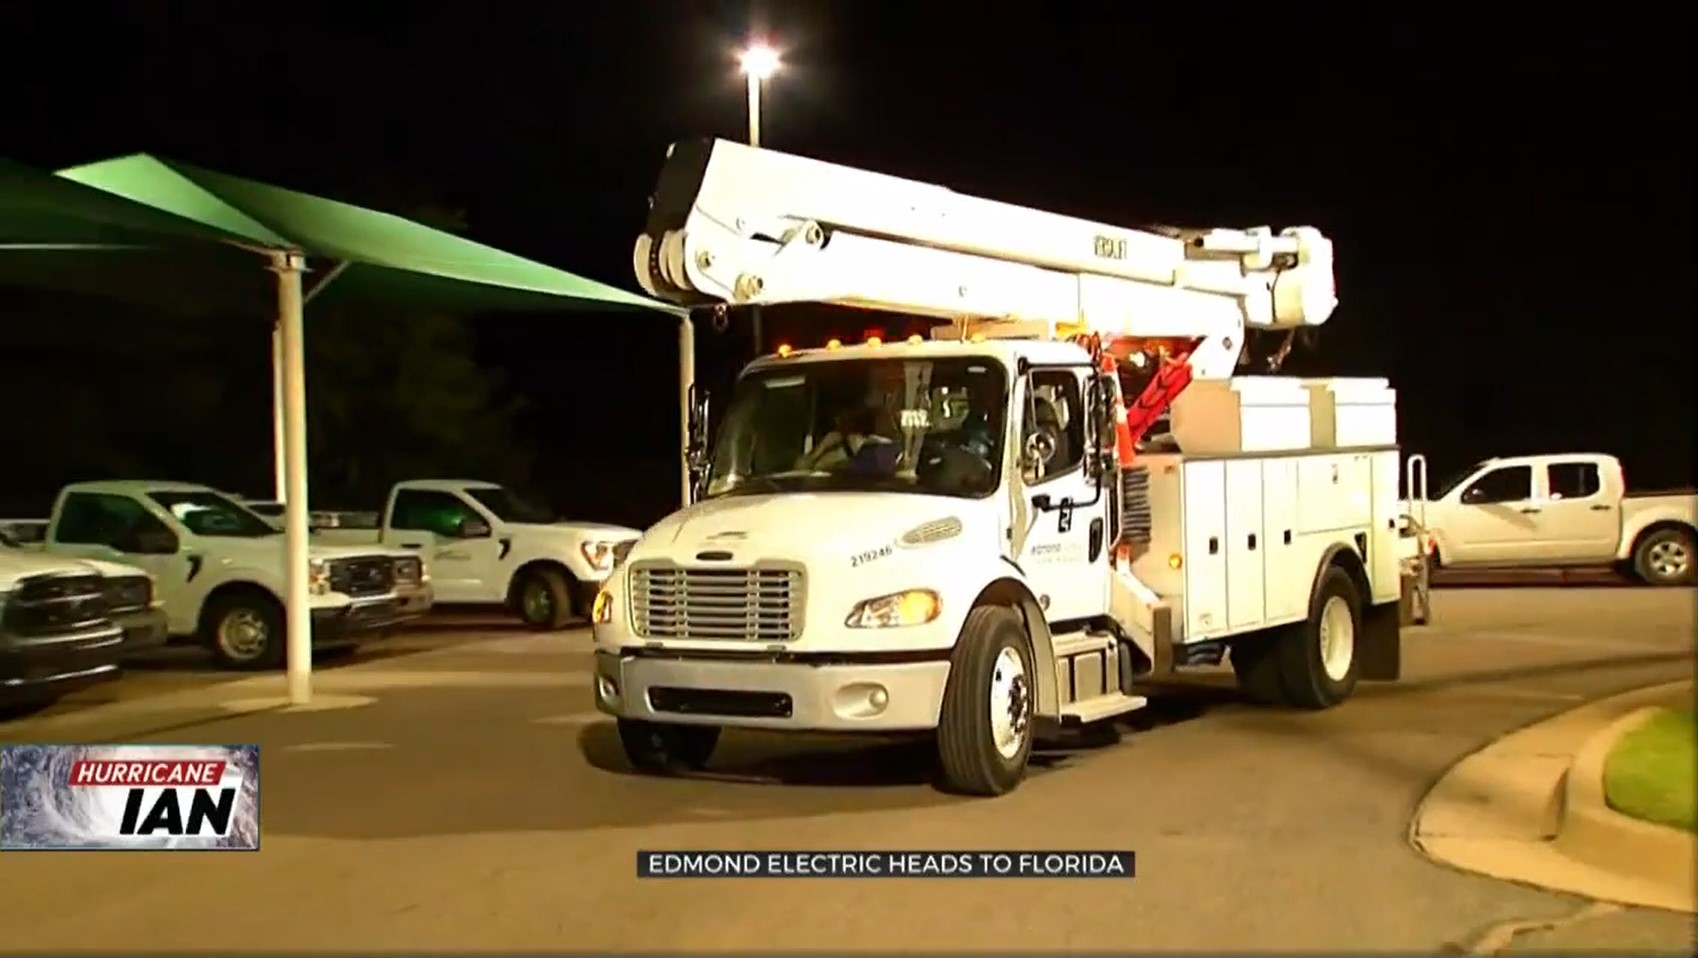 Edmond Electric Company Headed To Florida To Assist In Hurricane Relief